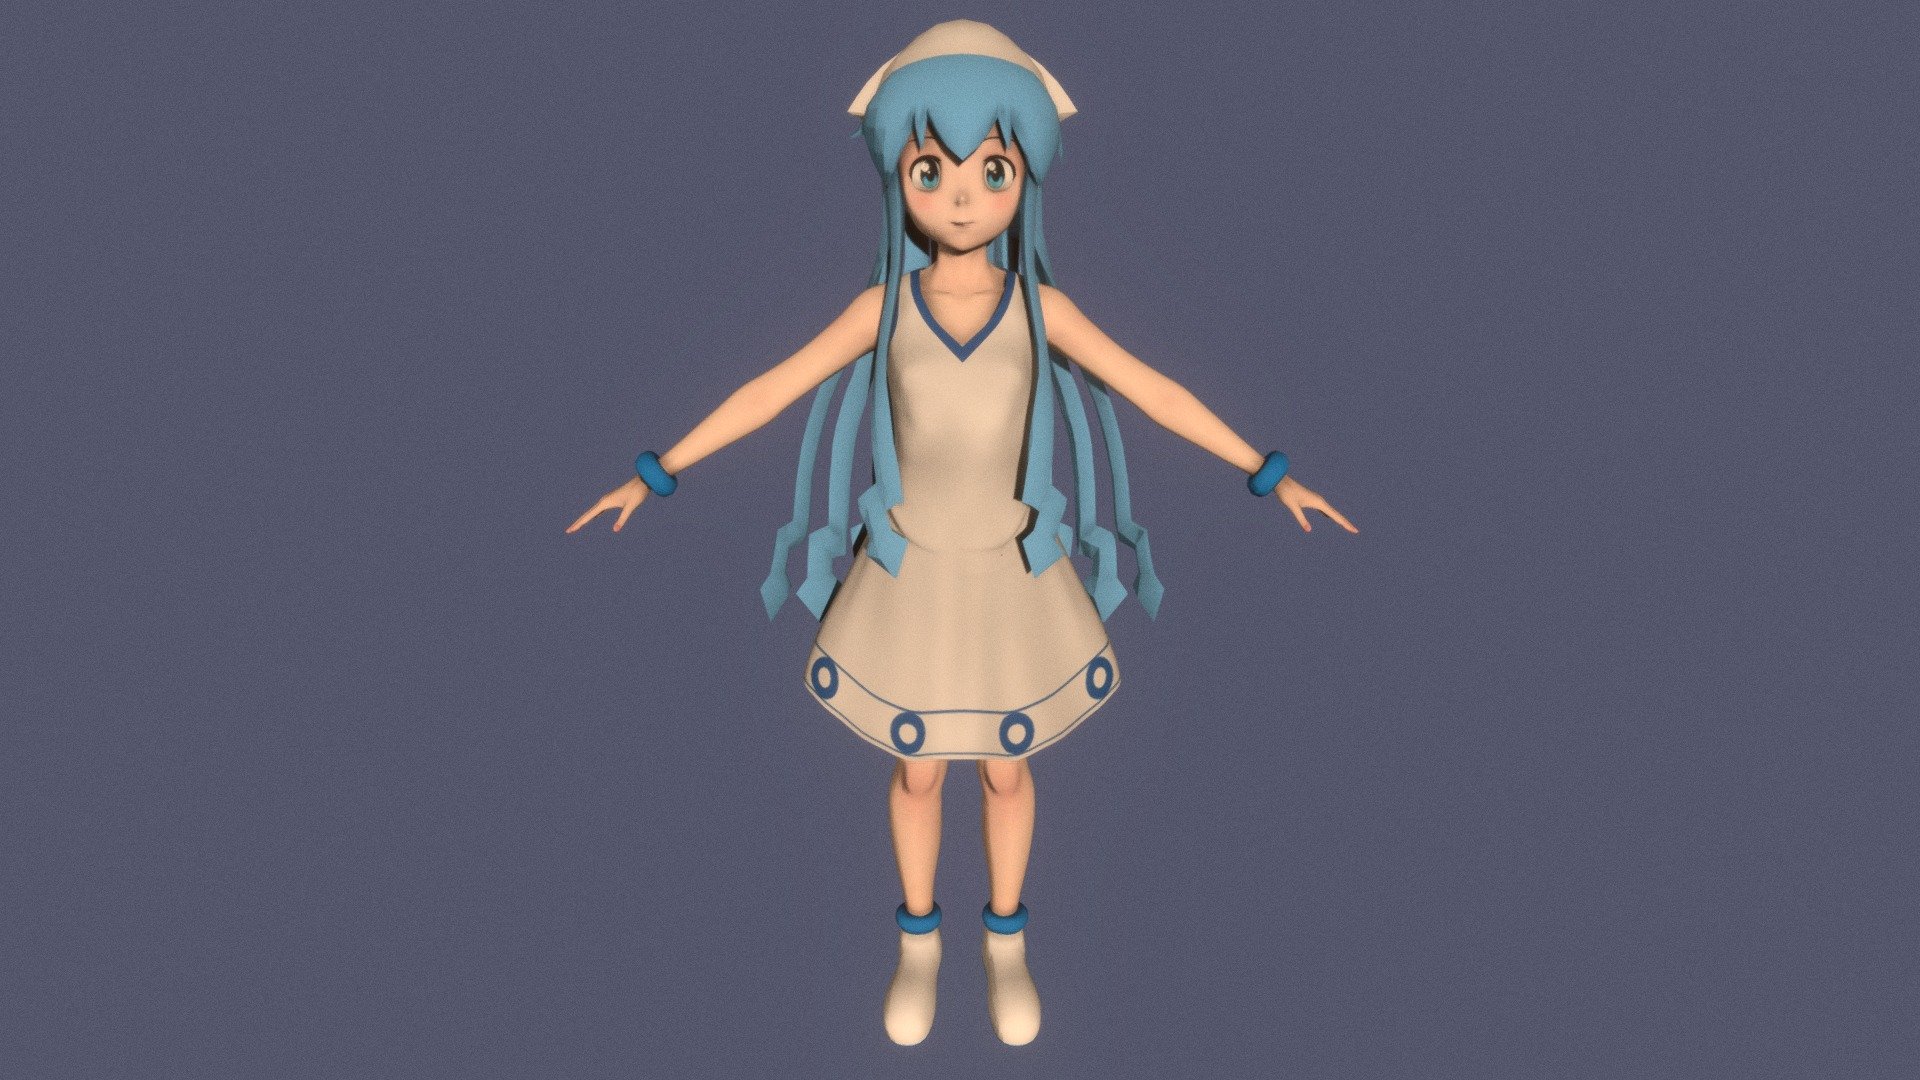 T-pose rigged model of anime girl Ika Musume (Shinryaku! Ika Musume).

Body and clothings are rigged and skinned by 3ds Max CAT system.

Eye direction and facial animation controlled by Morpher modifier / Shape Keys / Blendshape.

This product include .FBX (ver. 7200) and .MAX (ver. 2010) files.

3ds Max version is turbosmoothed to give a high quality render (as you can see here).

Original main body mesh have ~7.000 polys.

This 3D model may need some tweaking to adapt the rig system to games engine and other platforms.

I support convert model to various file formats (the rig data will be lost in this process): 3DS; AI; ASE; DAE; DWF; DWG; DXF; FLT; HTR; IGS; M3G; MQO; OBJ; SAT; STL; W3D; WRL; X.

You can buy all of my models in one pack to save cost: https://sketchfab.com/3d-models/all-of-my-anime-girls-c5a56156994e4193b9e8fa21a3b8360b

And I can make commission models.

If you have any questions, please leave a comment or contact me via my email 3d.eden.project@gmail.com 3d model